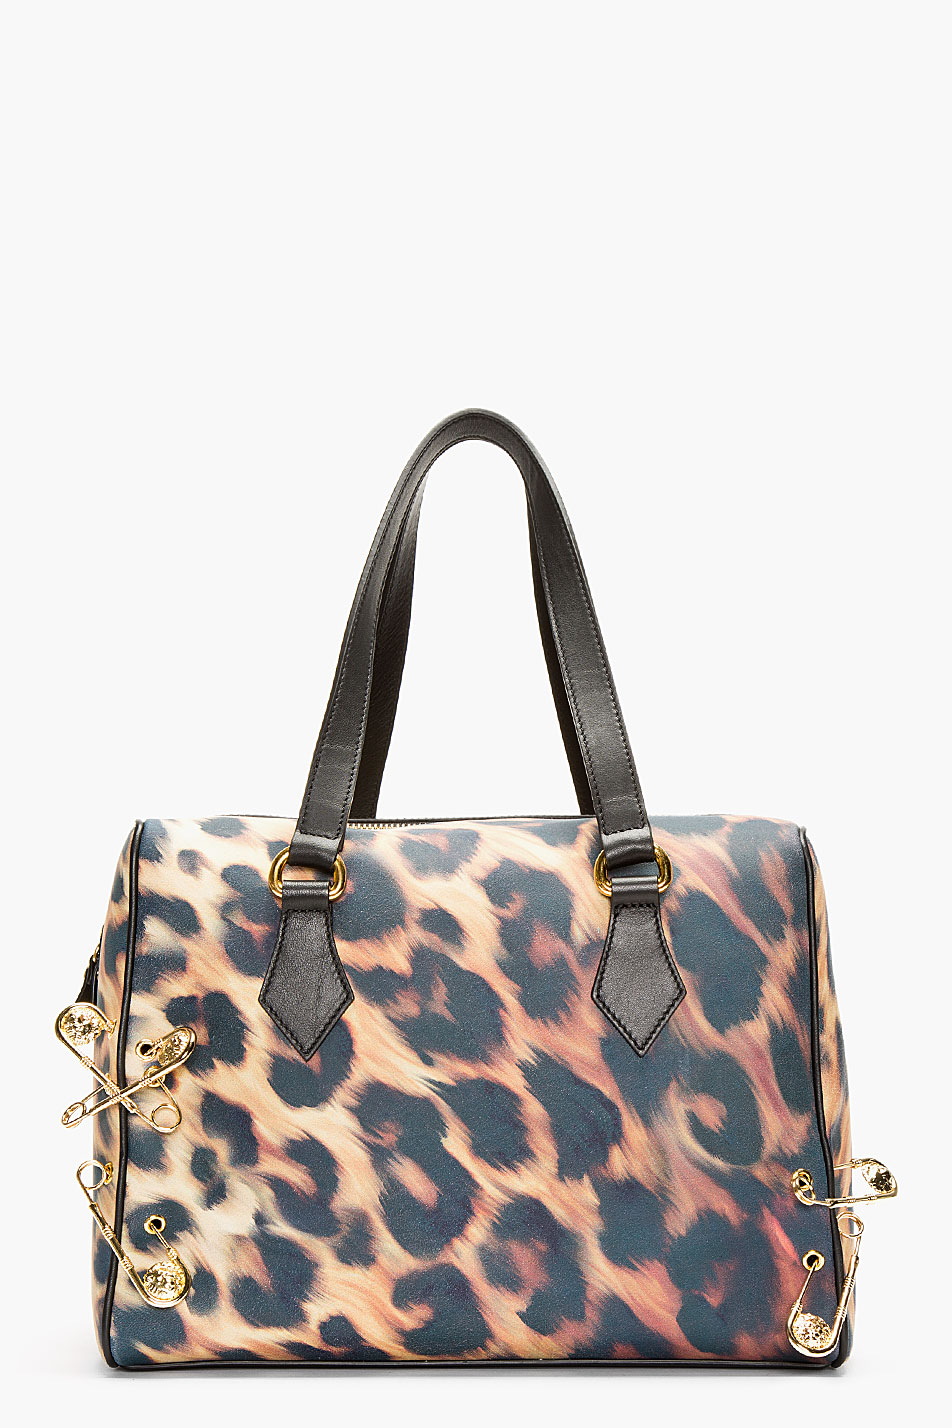 Versus Gold and Black Leopard Print Safety Pin Duffle Bag in Animal (gold) | Lyst